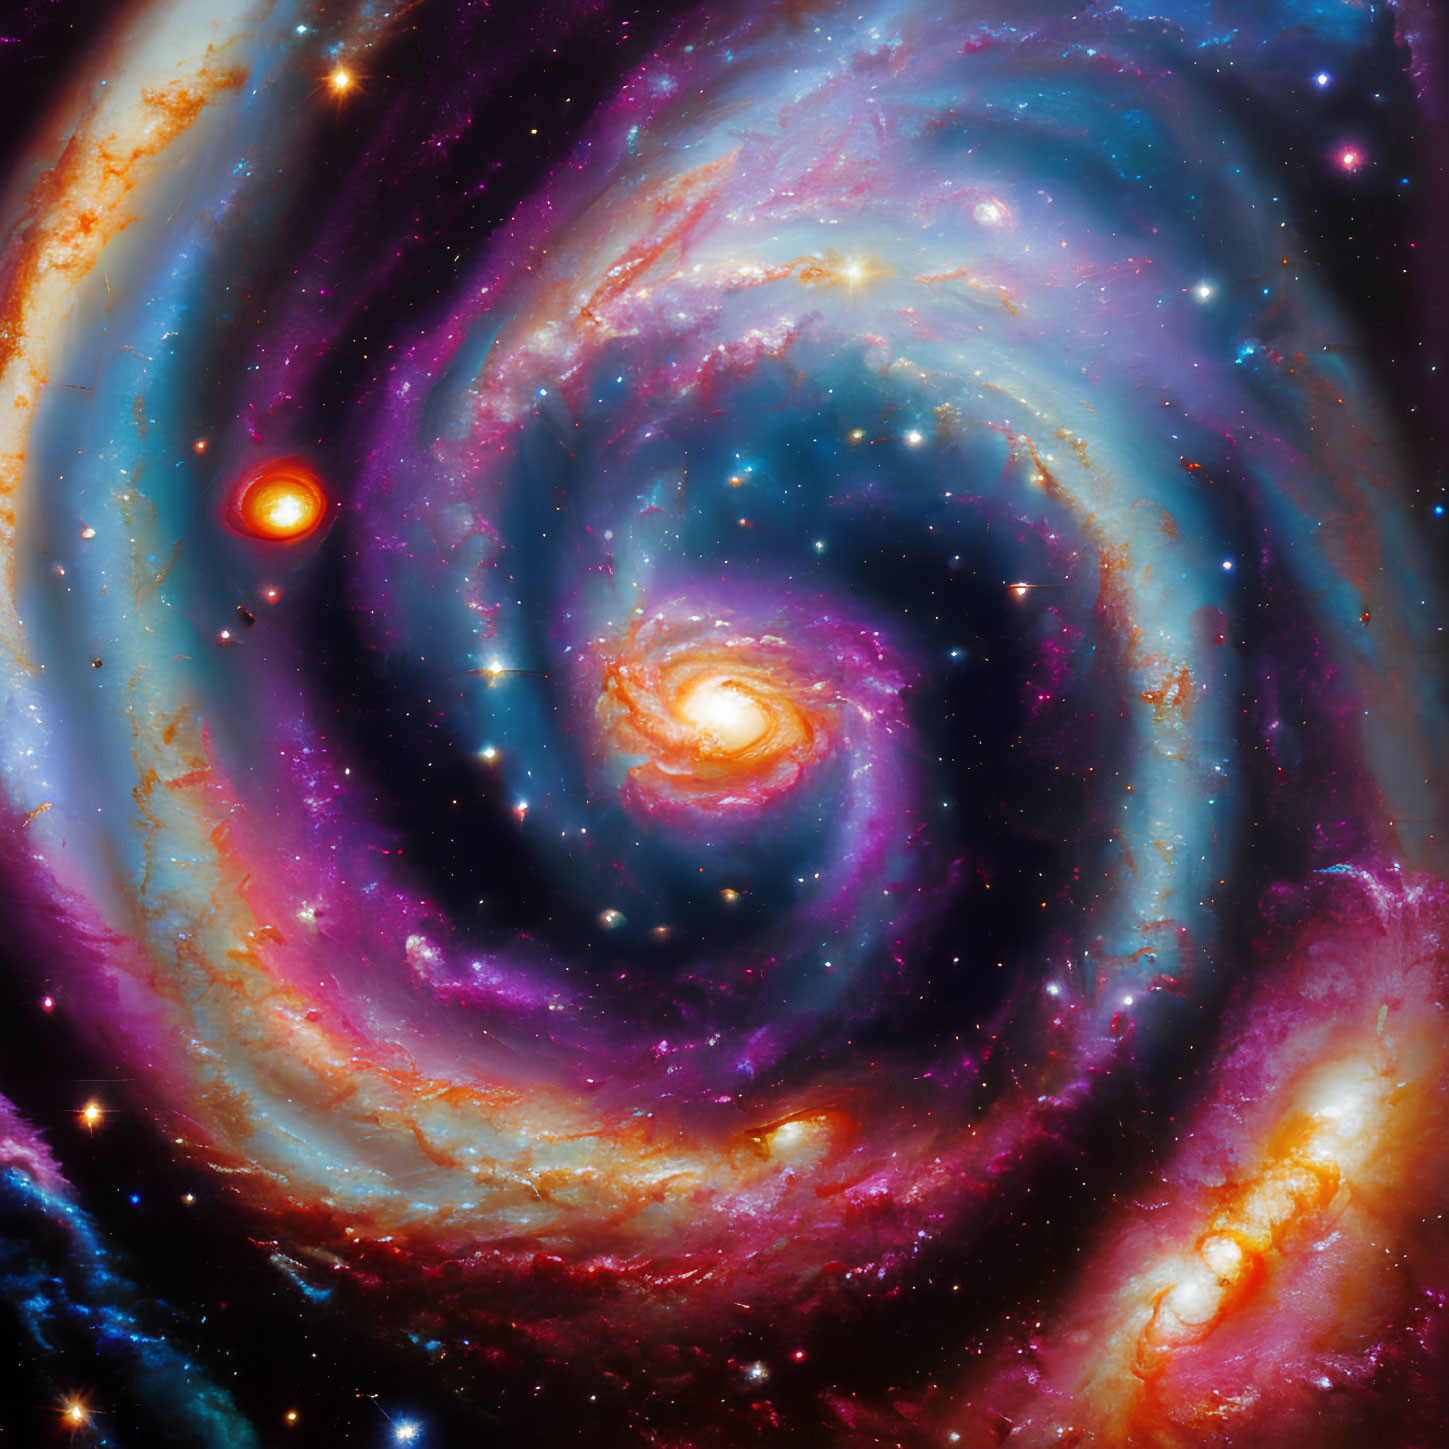 Spiral Galaxy with Swirling Stars and Cosmic Dust in Blue, Purple, and Orange